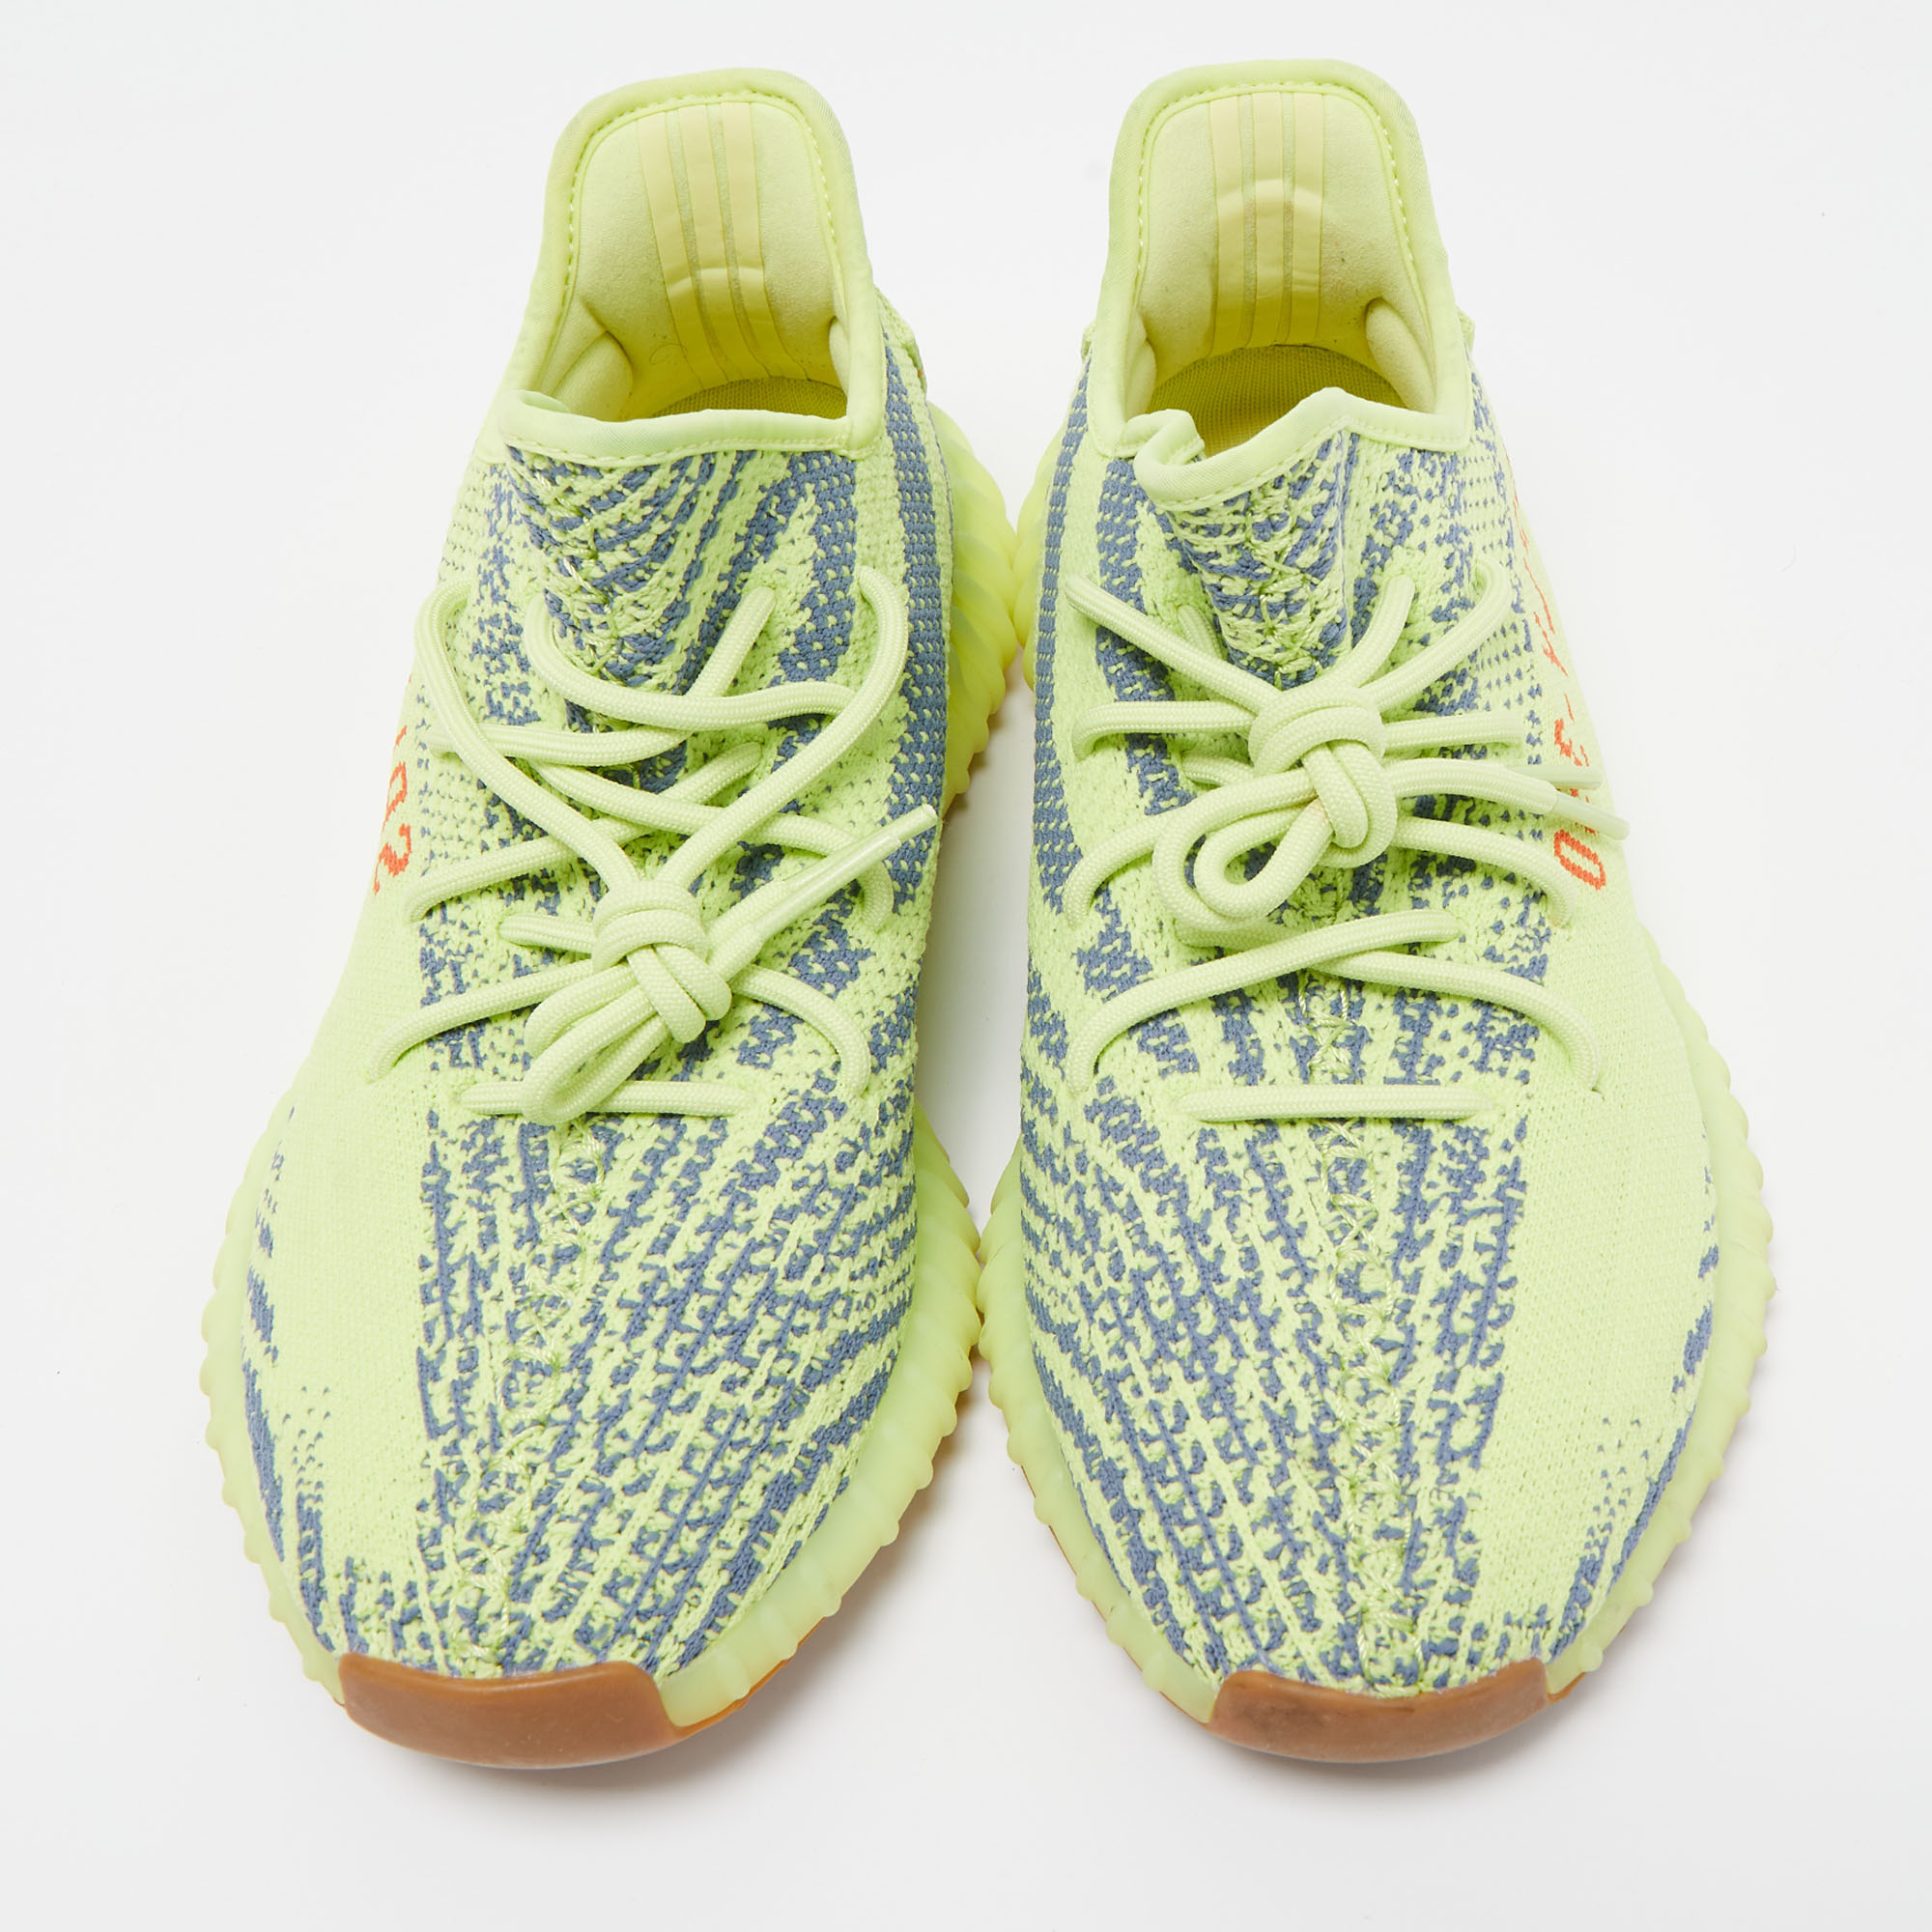 Yeezy X Adidas Neon Yellow/Blue Knit Fabric Boost 350 V2 Semi Frozen Yellow Sneakers Size 44